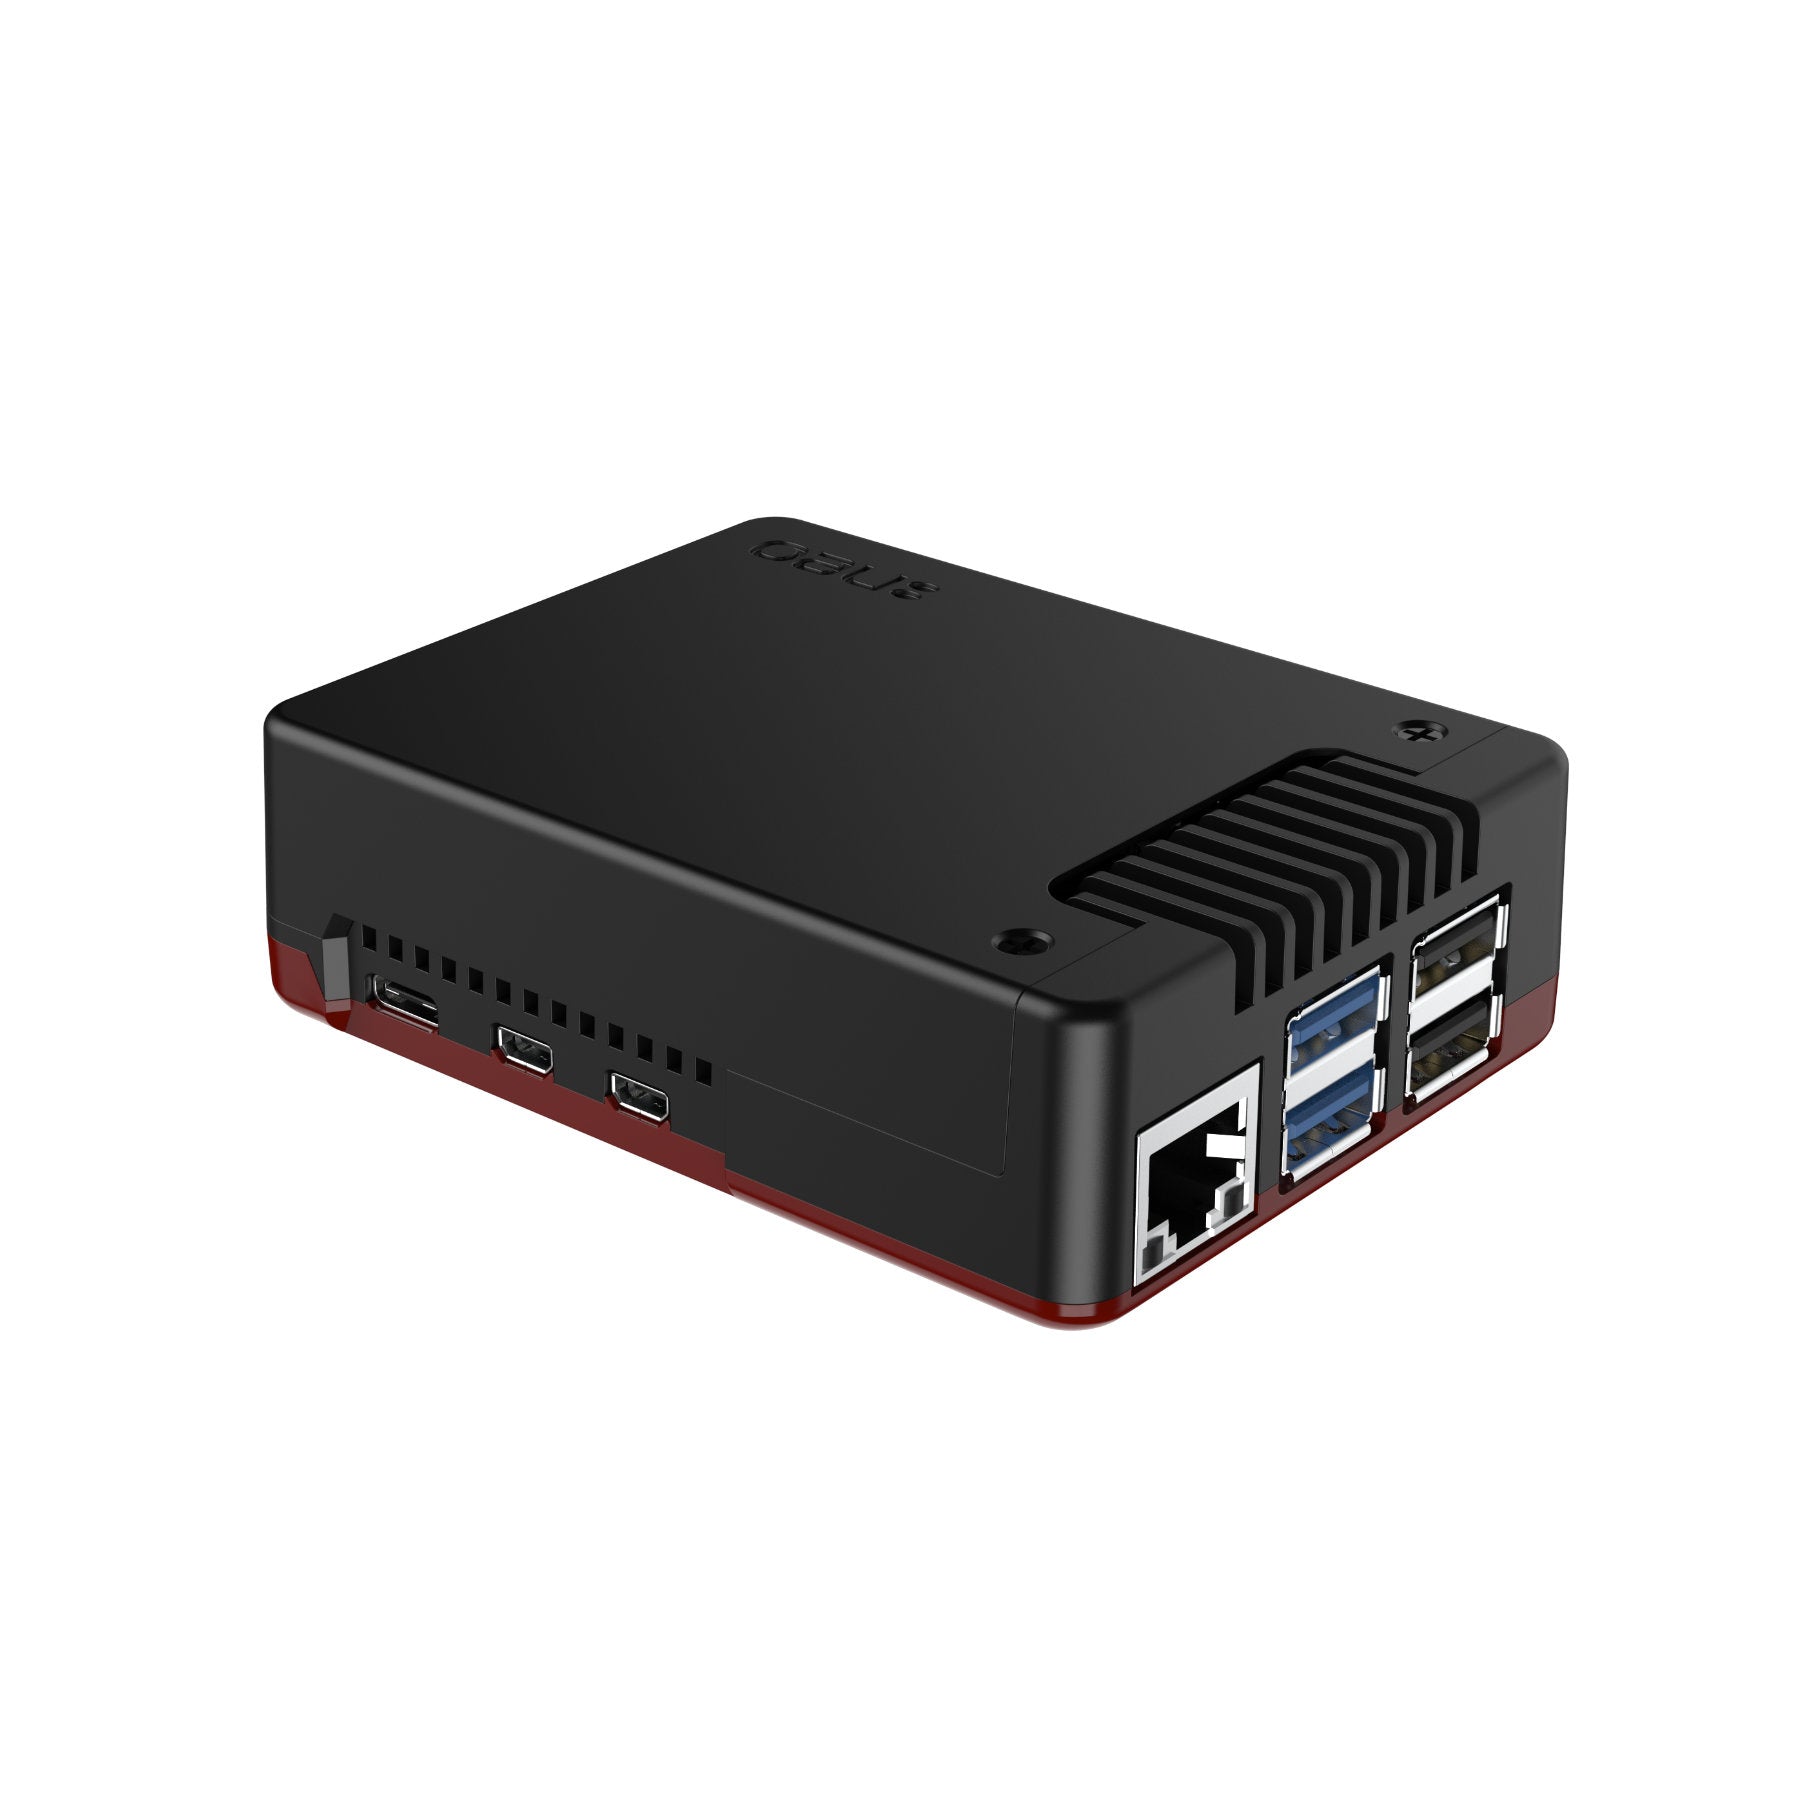 Argon NEO Case with USB Type-C Power Supply for Raspberry Pi 4 | Supports  Cooling Fan, Camera, and LCD Display | GPIO and PoE Pins are Accessible